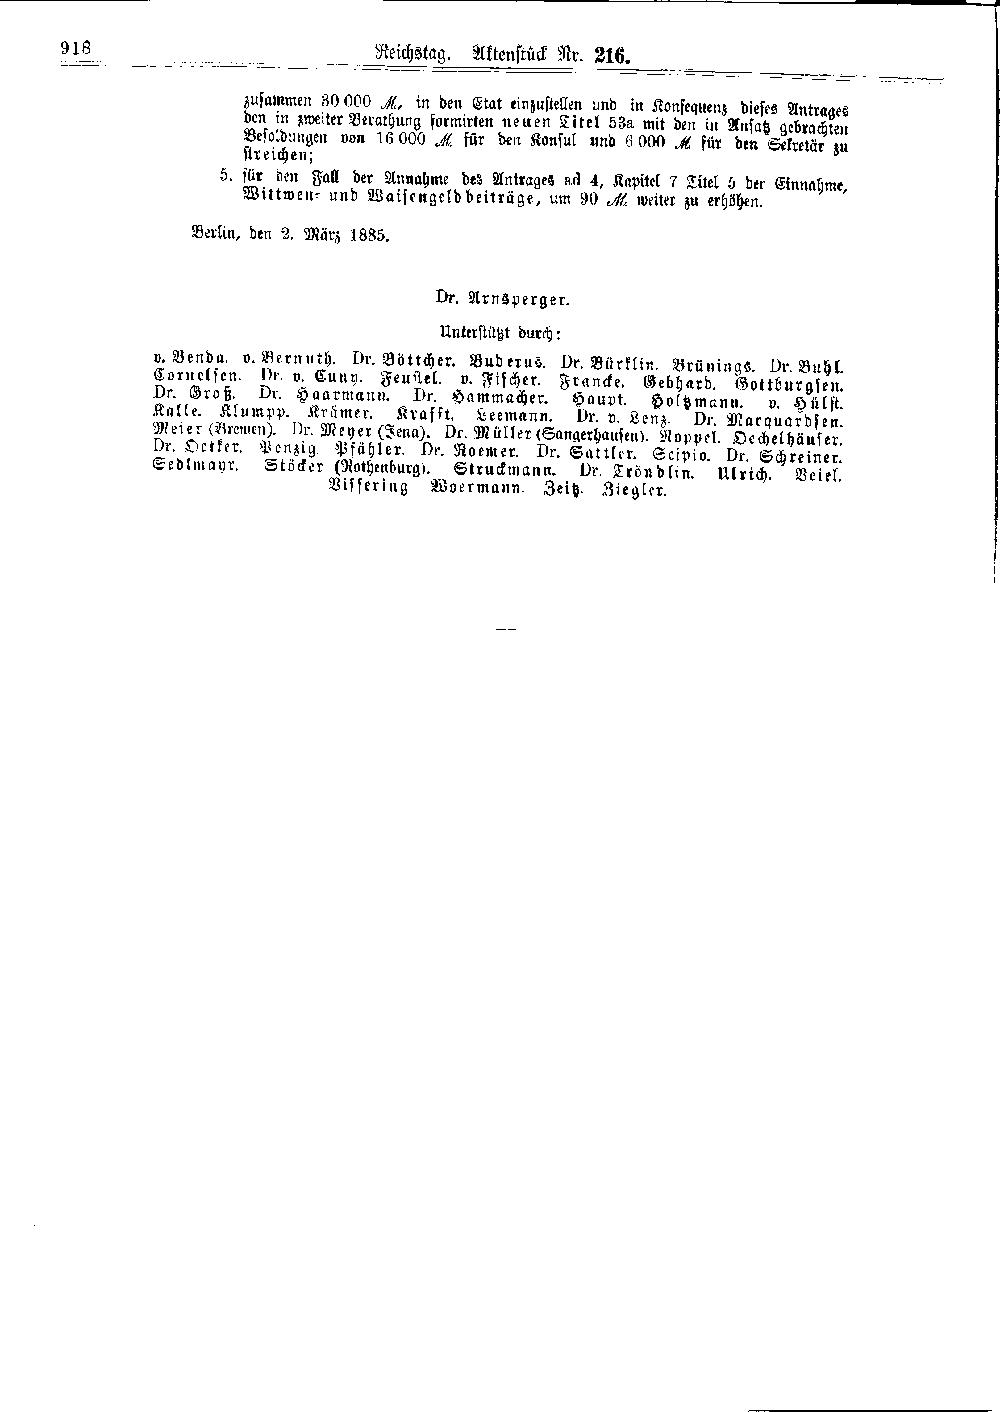 Scan of page 918